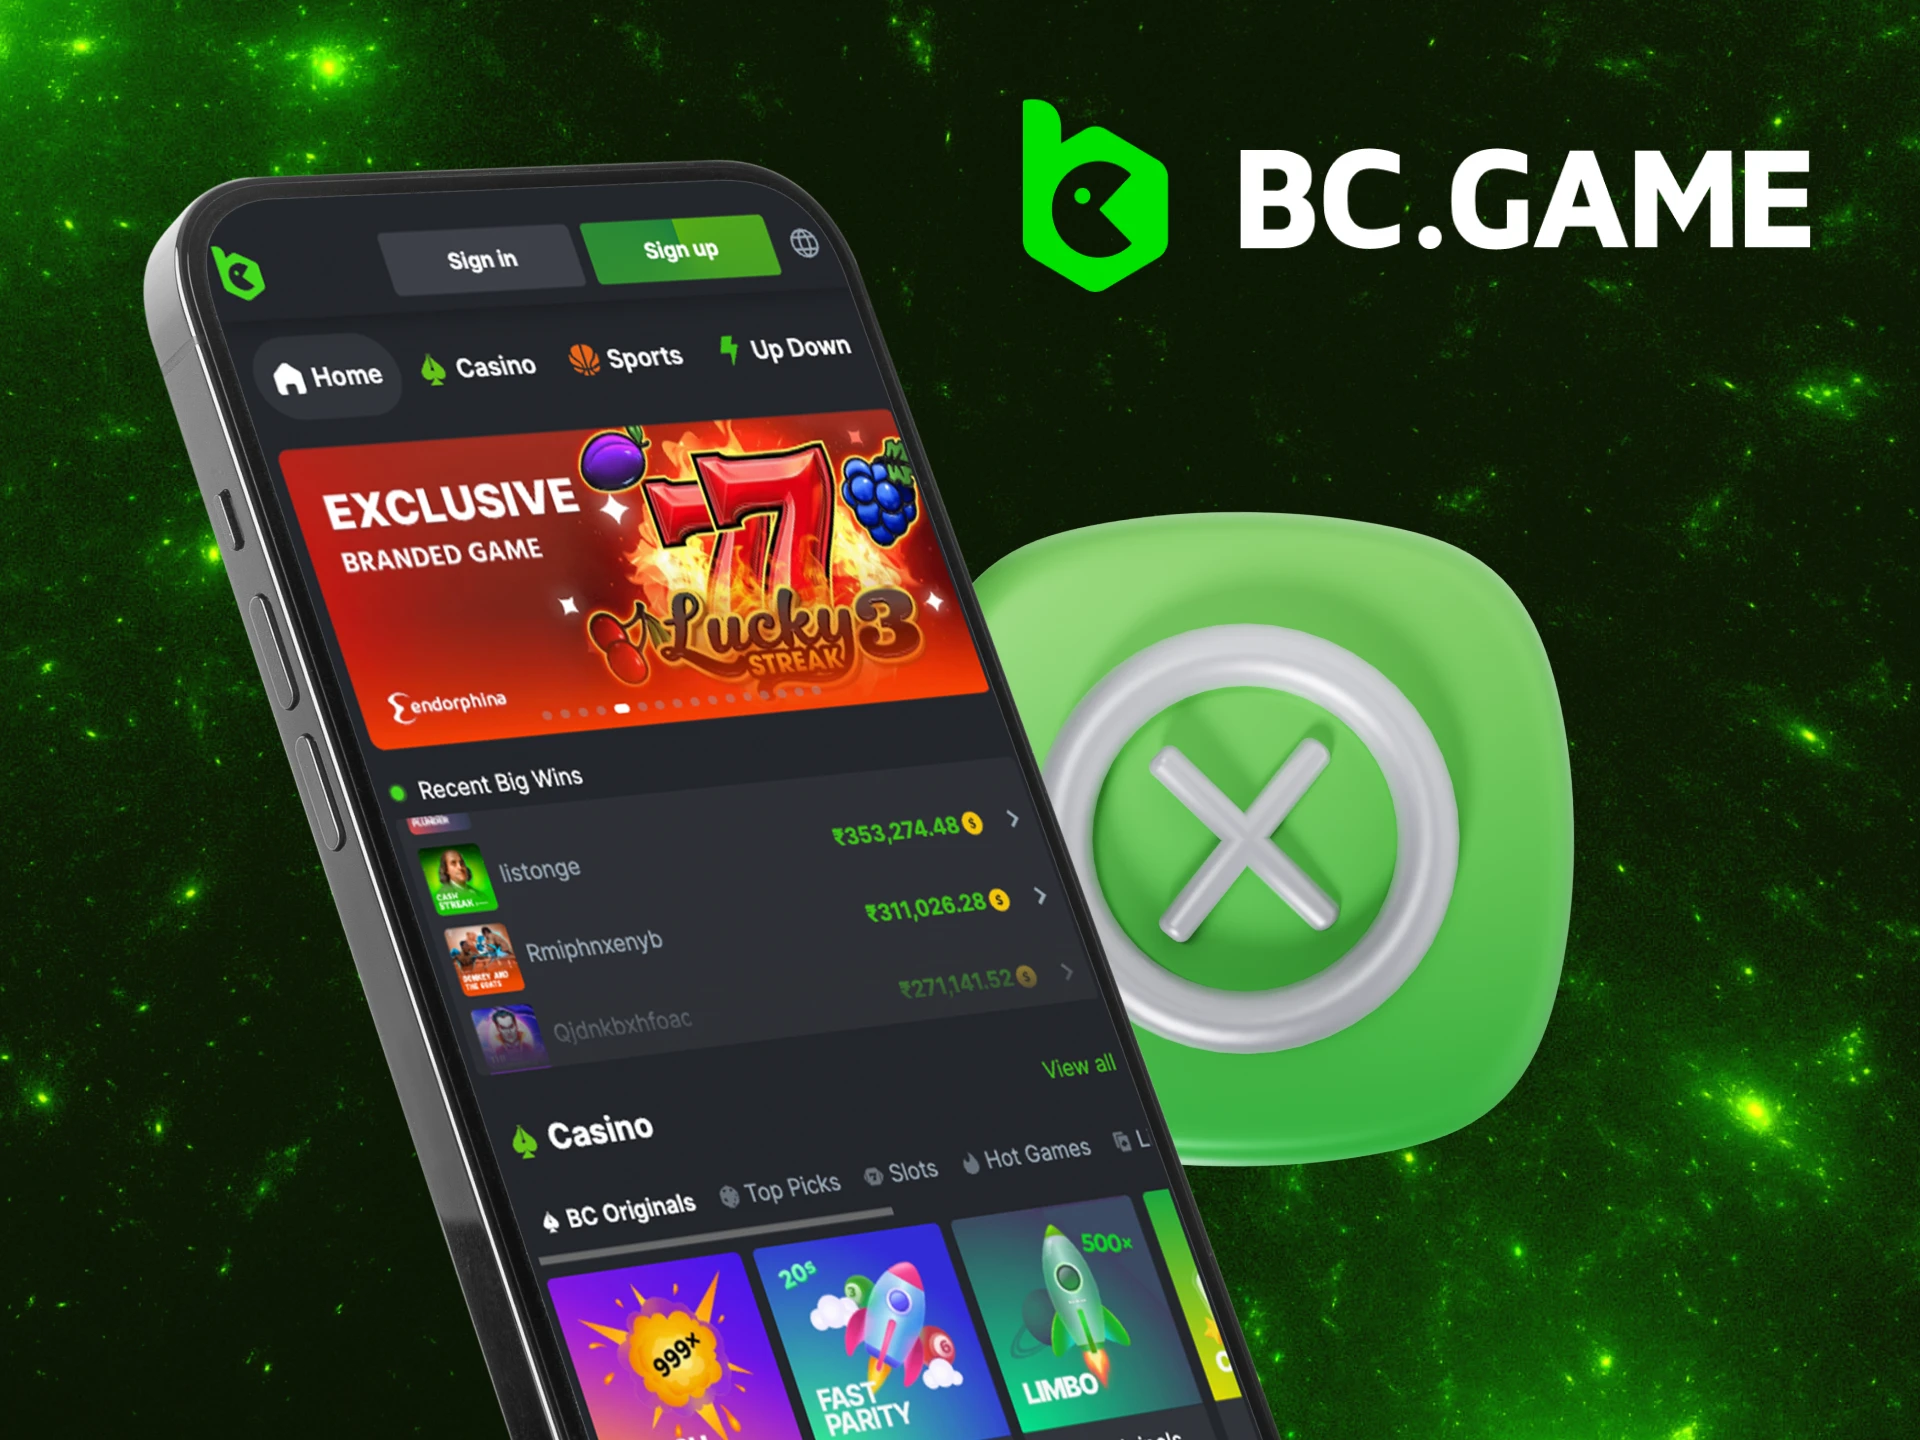 How to uninstall the BC Game application.